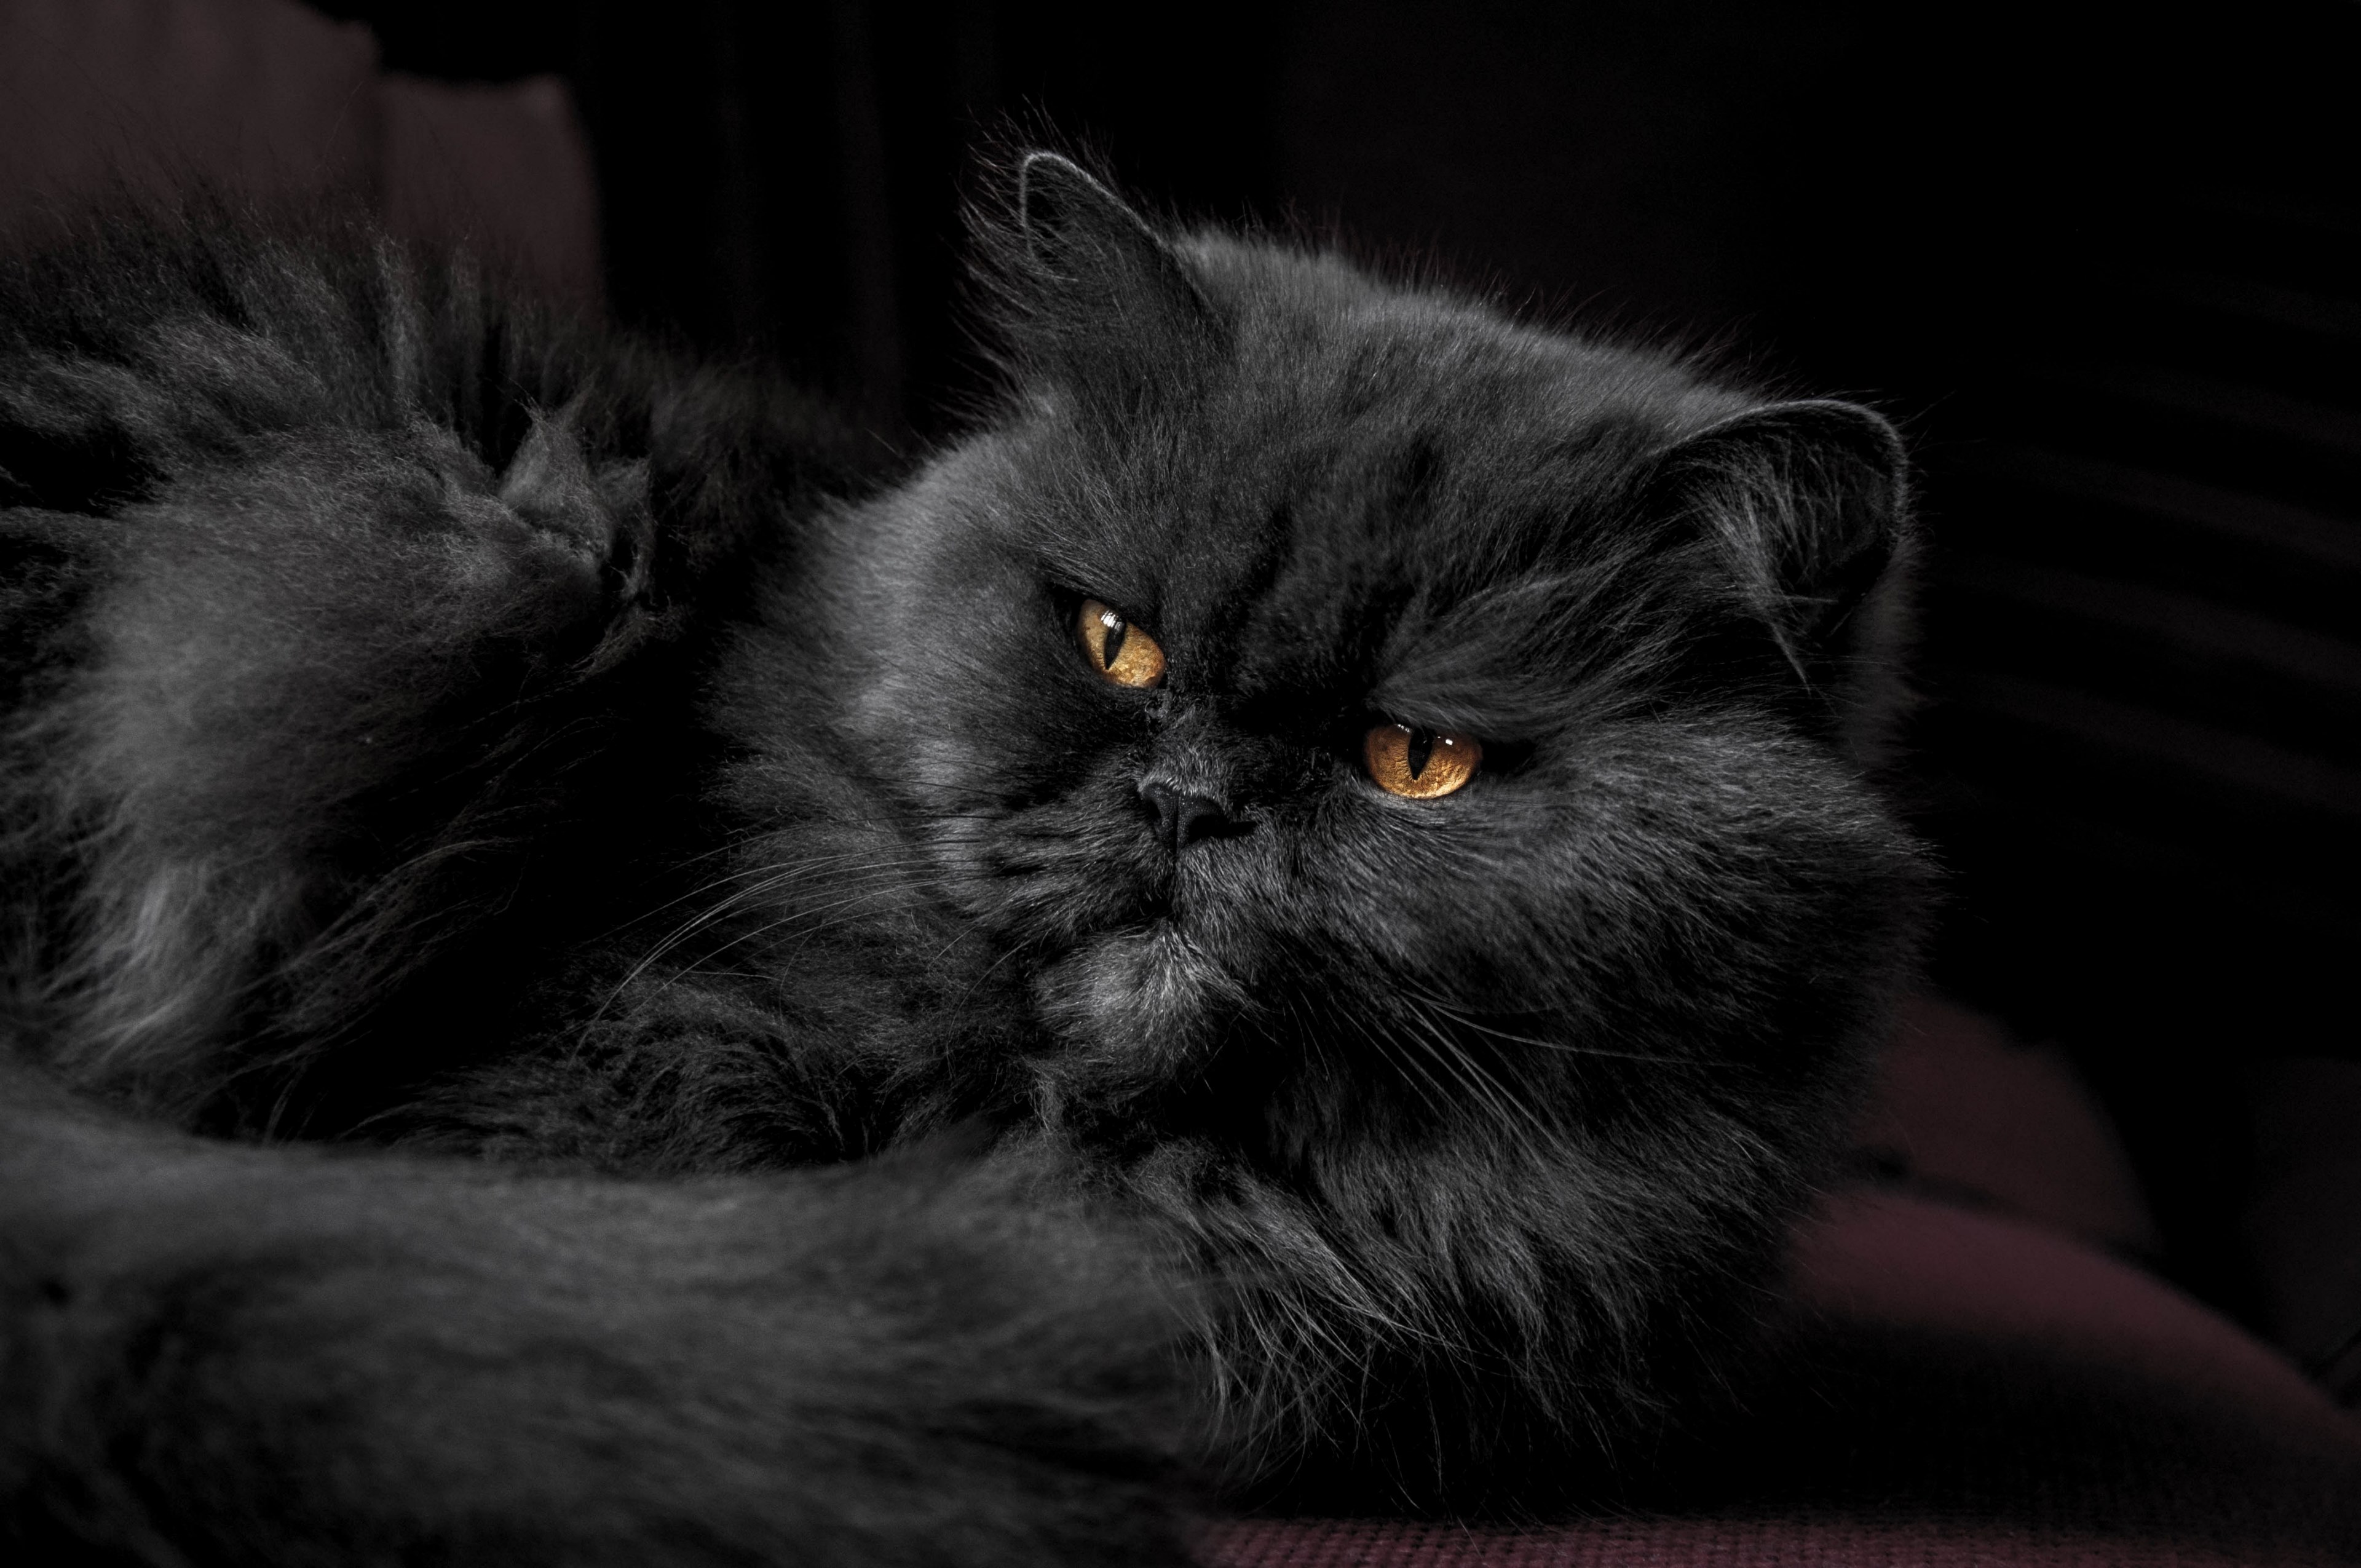 Wallpaper ID 209469 close up of a black persian cat grouchy